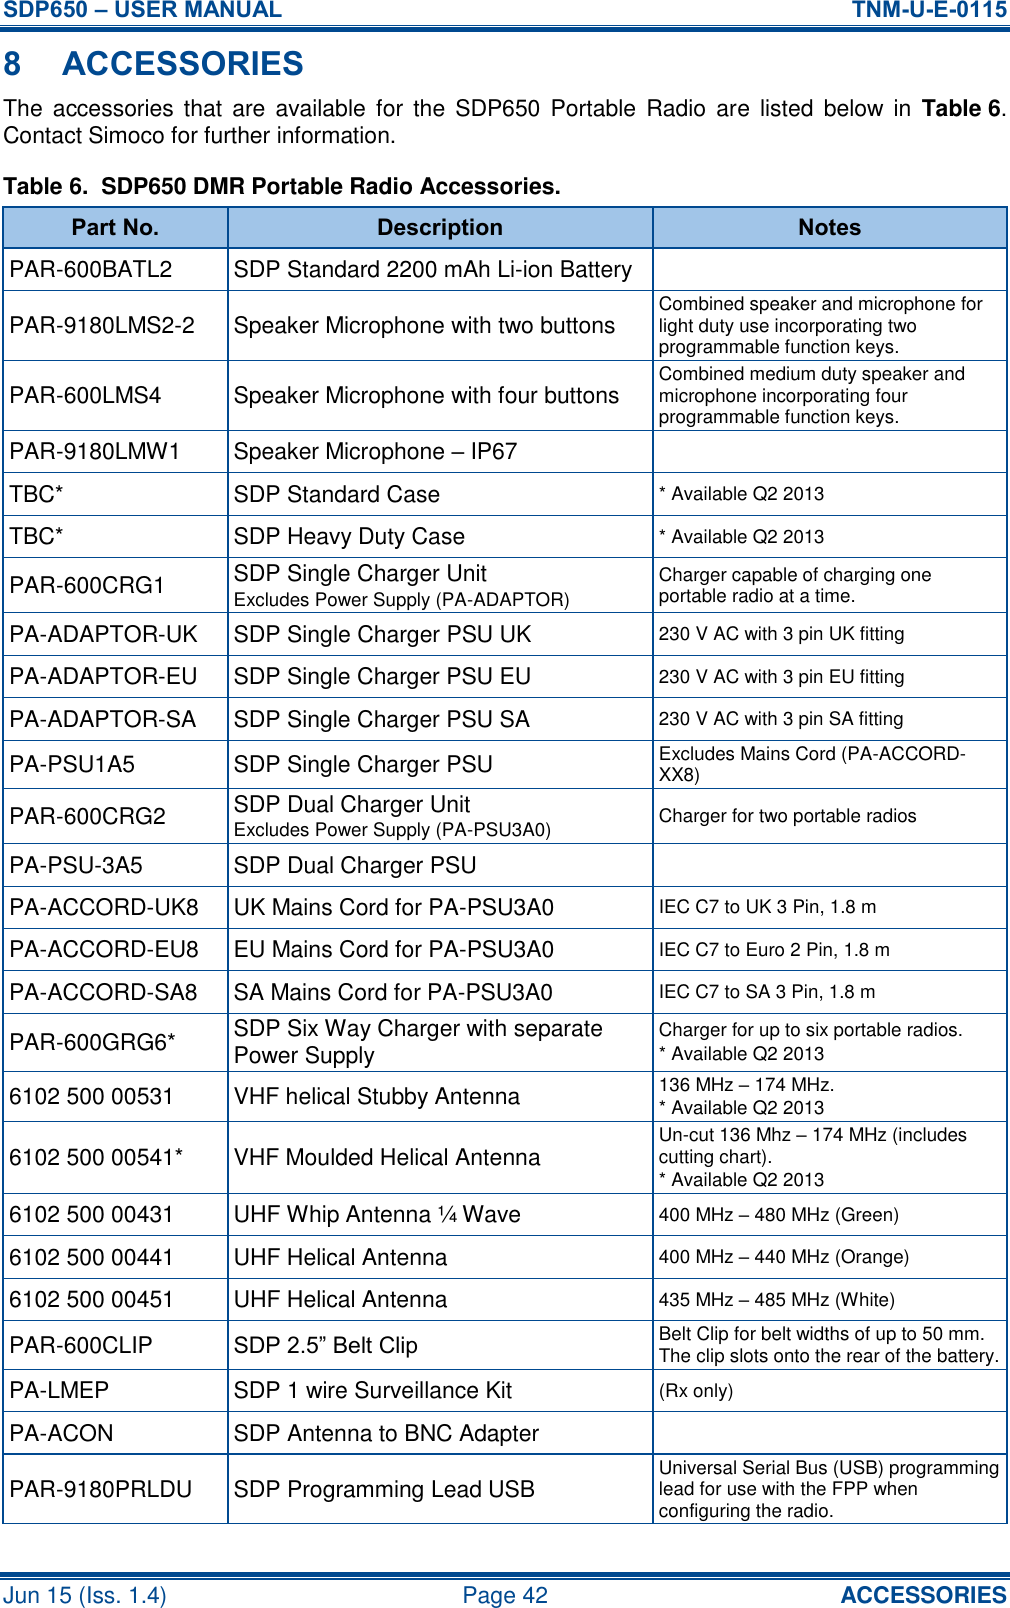 SDP650 – USER MANUAL  TNM-U-E-0115 Jun 15 (Iss. 1.4)  Page 42 ACCESSORIES 8 ACCESSORIES The  accessories that  are  available  for  the  SDP650  Portable  Radio  are listed  below in  Table 6.  Contact Simoco for further information. Table 6.  SDP650 DMR Portable Radio Accessories. Part No. Description Notes PAR-600BATL2 SDP Standard 2200 mAh Li-ion Battery  PAR-9180LMS2-2 Speaker Microphone with two buttons Combined speaker and microphone for light duty use incorporating two programmable function keys. PAR-600LMS4 Speaker Microphone with four buttons Combined medium duty speaker and microphone incorporating four programmable function keys. PAR-9180LMW1 Speaker Microphone – IP67  TBC* SDP Standard Case * Available Q2 2013 TBC* SDP Heavy Duty Case * Available Q2 2013 PAR-600CRG1 SDP Single Charger Unit Excludes Power Supply (PA-ADAPTOR) Charger capable of charging one portable radio at a time. PA-ADAPTOR-UK SDP Single Charger PSU UK 230 V AC with 3 pin UK fitting PA-ADAPTOR-EU SDP Single Charger PSU EU 230 V AC with 3 pin EU fitting PA-ADAPTOR-SA SDP Single Charger PSU SA 230 V AC with 3 pin SA fitting PA-PSU1A5 SDP Single Charger PSU Excludes Mains Cord (PA-ACCORD-XX8) PAR-600CRG2 SDP Dual Charger Unit Excludes Power Supply (PA-PSU3A0) Charger for two portable radios PA-PSU-3A5 SDP Dual Charger PSU  PA-ACCORD-UK8 UK Mains Cord for PA-PSU3A0 IEC C7 to UK 3 Pin, 1.8 m PA-ACCORD-EU8 EU Mains Cord for PA-PSU3A0 IEC C7 to Euro 2 Pin, 1.8 m PA-ACCORD-SA8 SA Mains Cord for PA-PSU3A0 IEC C7 to SA 3 Pin, 1.8 m PAR-600GRG6* SDP Six Way Charger with separate Power Supply Charger for up to six portable radios. * Available Q2 2013 6102 500 00531 VHF helical Stubby Antenna 136 MHz – 174 MHz. * Available Q2 2013 6102 500 00541* VHF Moulded Helical Antenna Un-cut 136 Mhz – 174 MHz (includes cutting chart). * Available Q2 2013 6102 500 00431 UHF Whip Antenna ¼ Wave 400 MHz – 480 MHz (Green) 6102 500 00441 UHF Helical Antenna 400 MHz – 440 MHz (Orange) 6102 500 00451 UHF Helical Antenna 435 MHz – 485 MHz (White) PAR-600CLIP SDP 2.5” Belt Clip Belt Clip for belt widths of up to 50 mm.  The clip slots onto the rear of the battery. PA-LMEP SDP 1 wire Surveillance Kit (Rx only) PA-ACON SDP Antenna to BNC Adapter  PAR-9180PRLDU SDP Programming Lead USB Universal Serial Bus (USB) programming lead for use with the FPP when configuring the radio. 